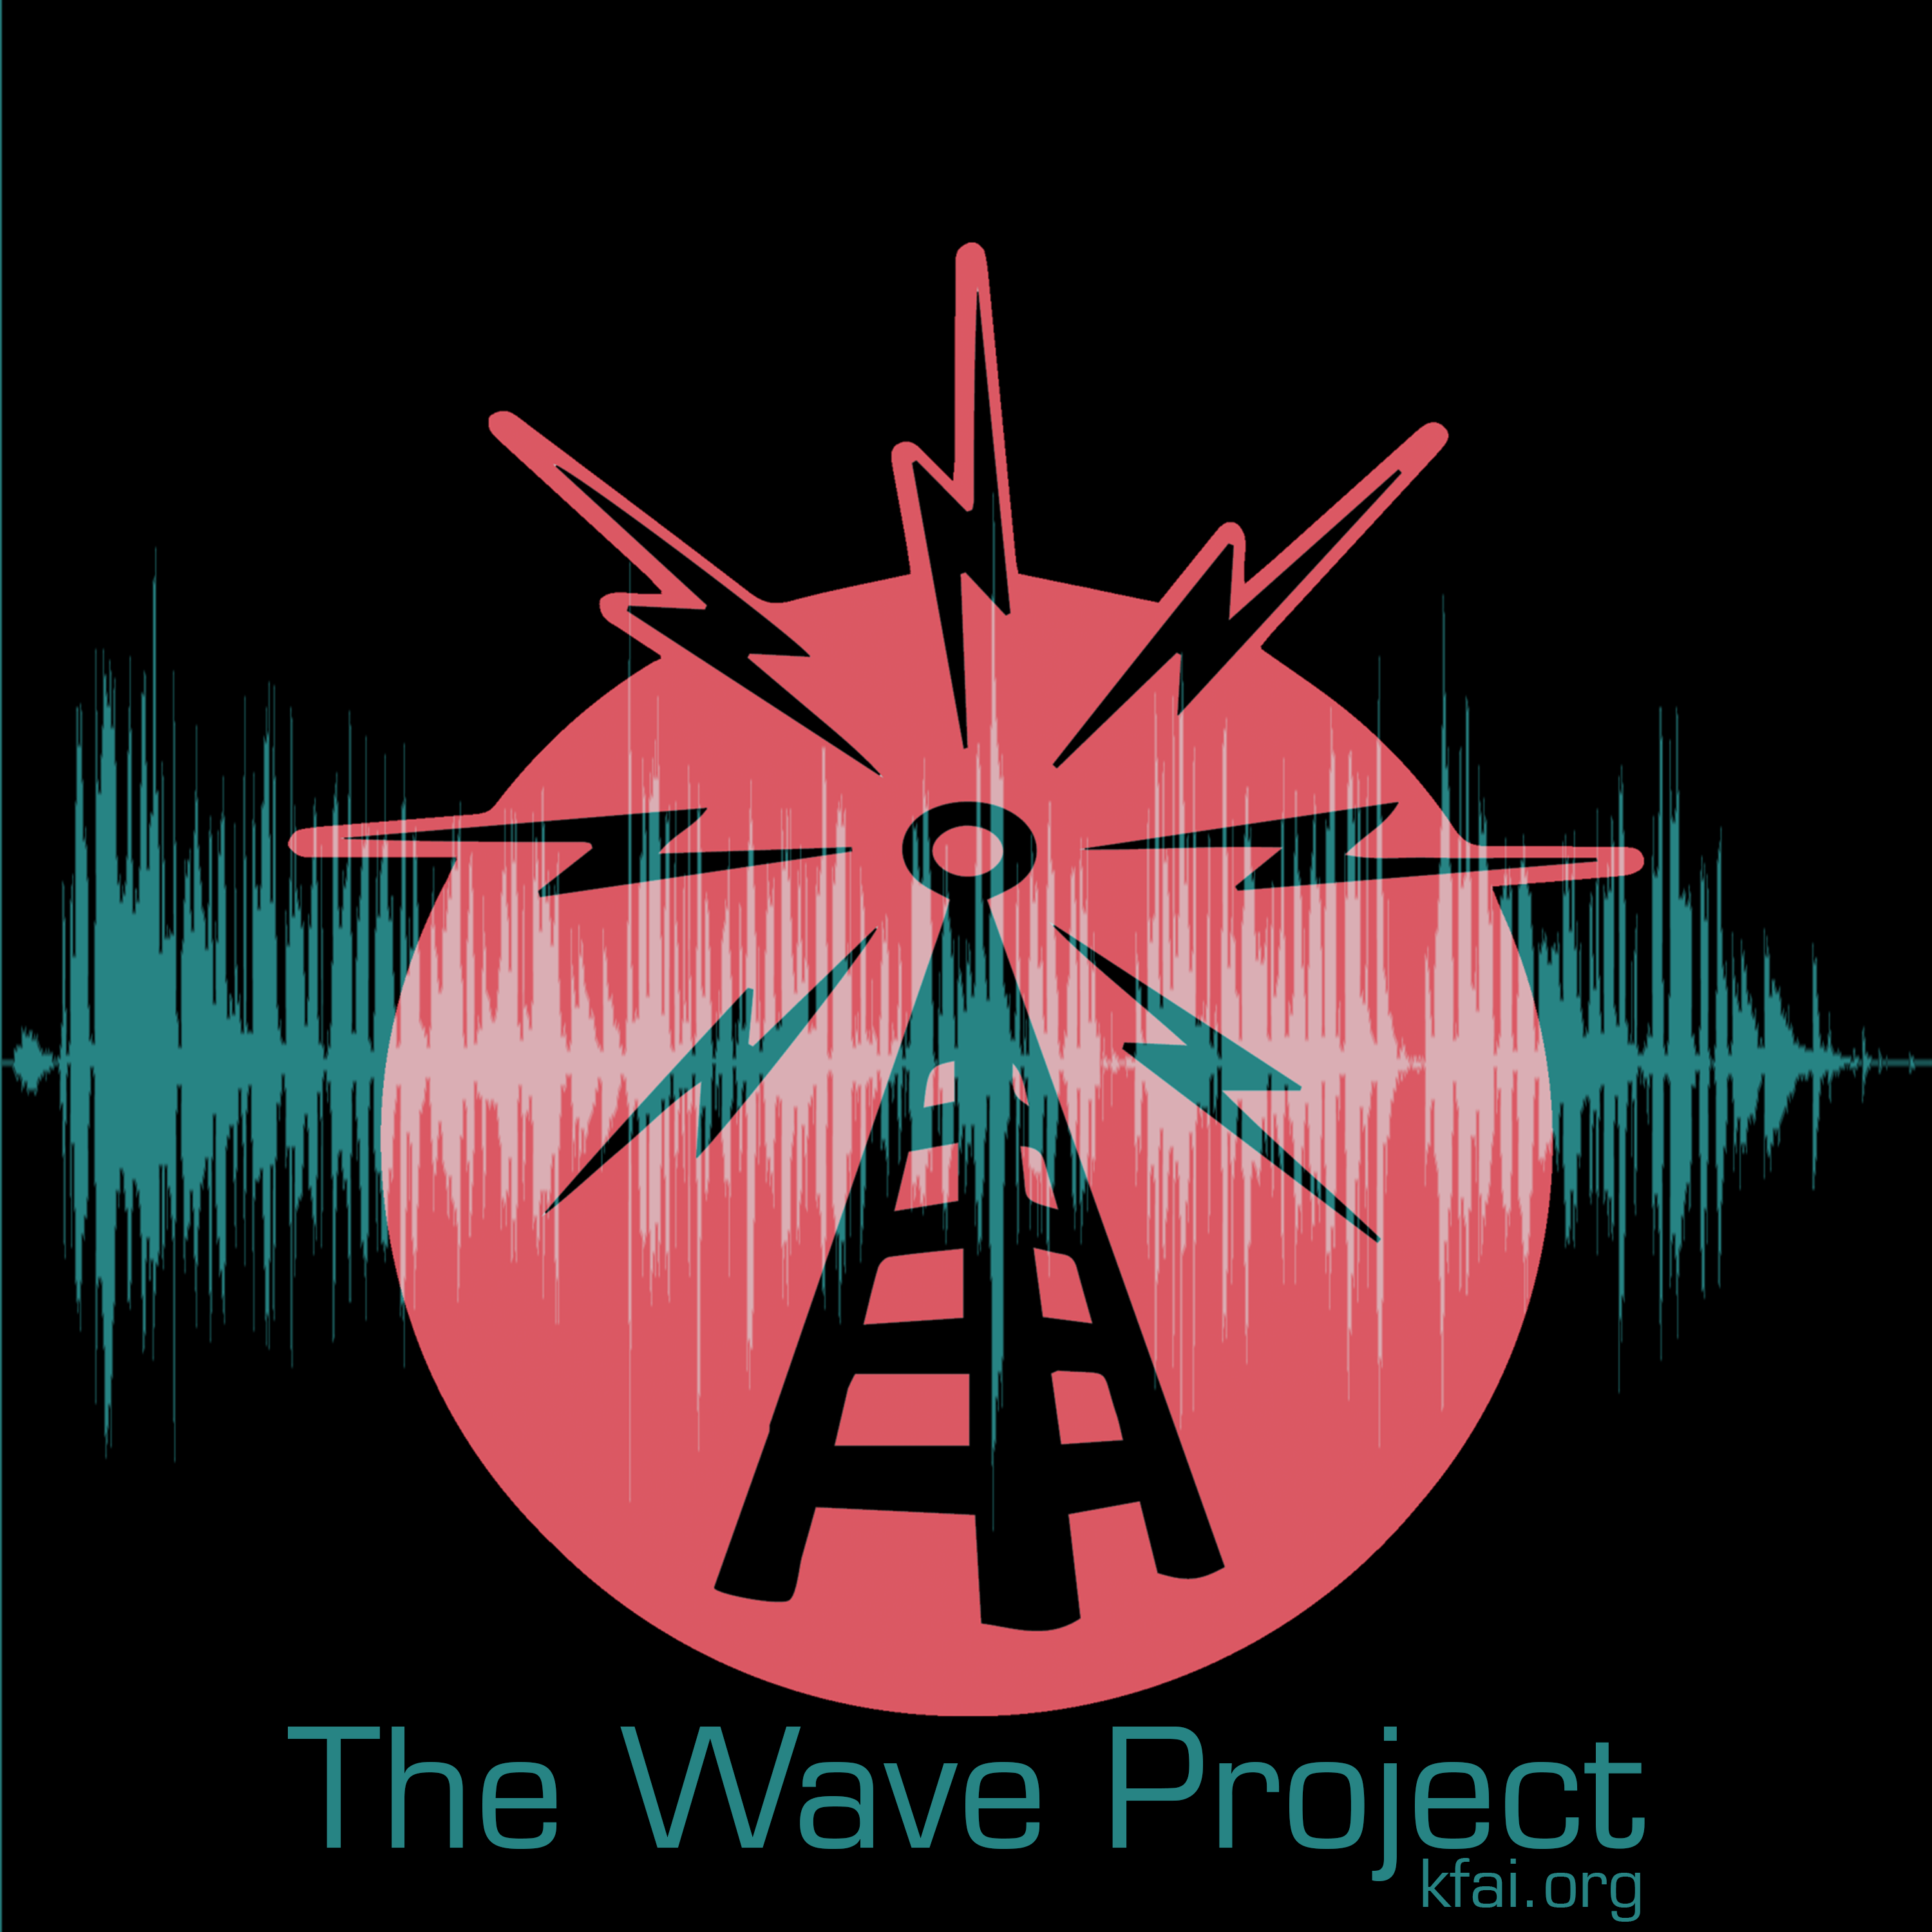 The Wave Project - The Minnesconsin Show with Mary Mack